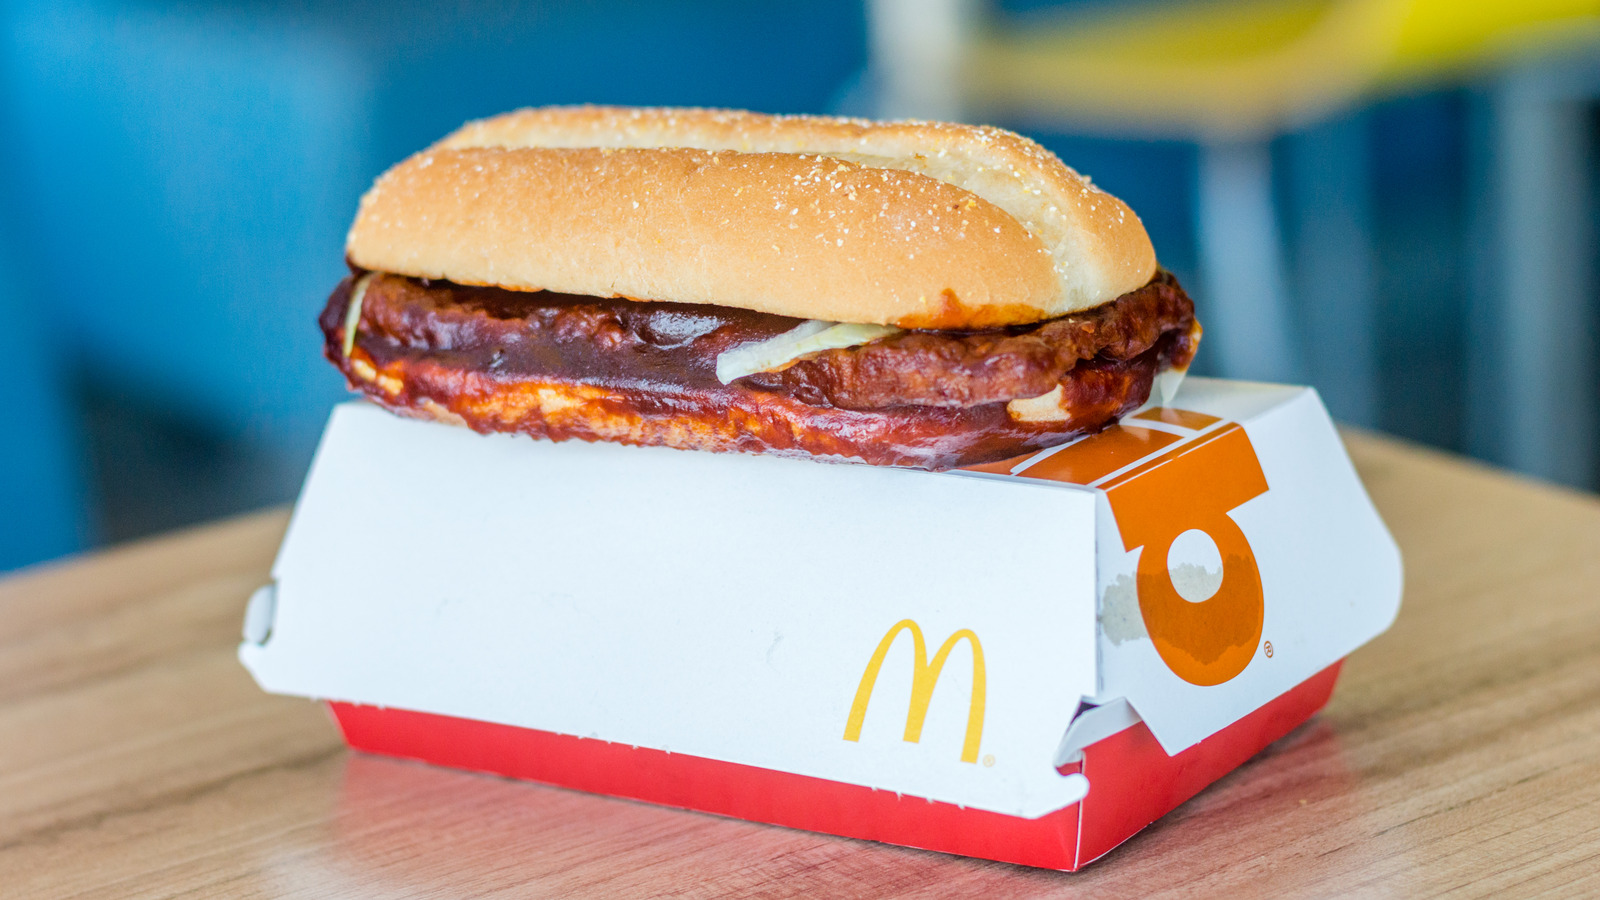 McDonald's Is Officially Bringing Back The McRib. Here's What We Know